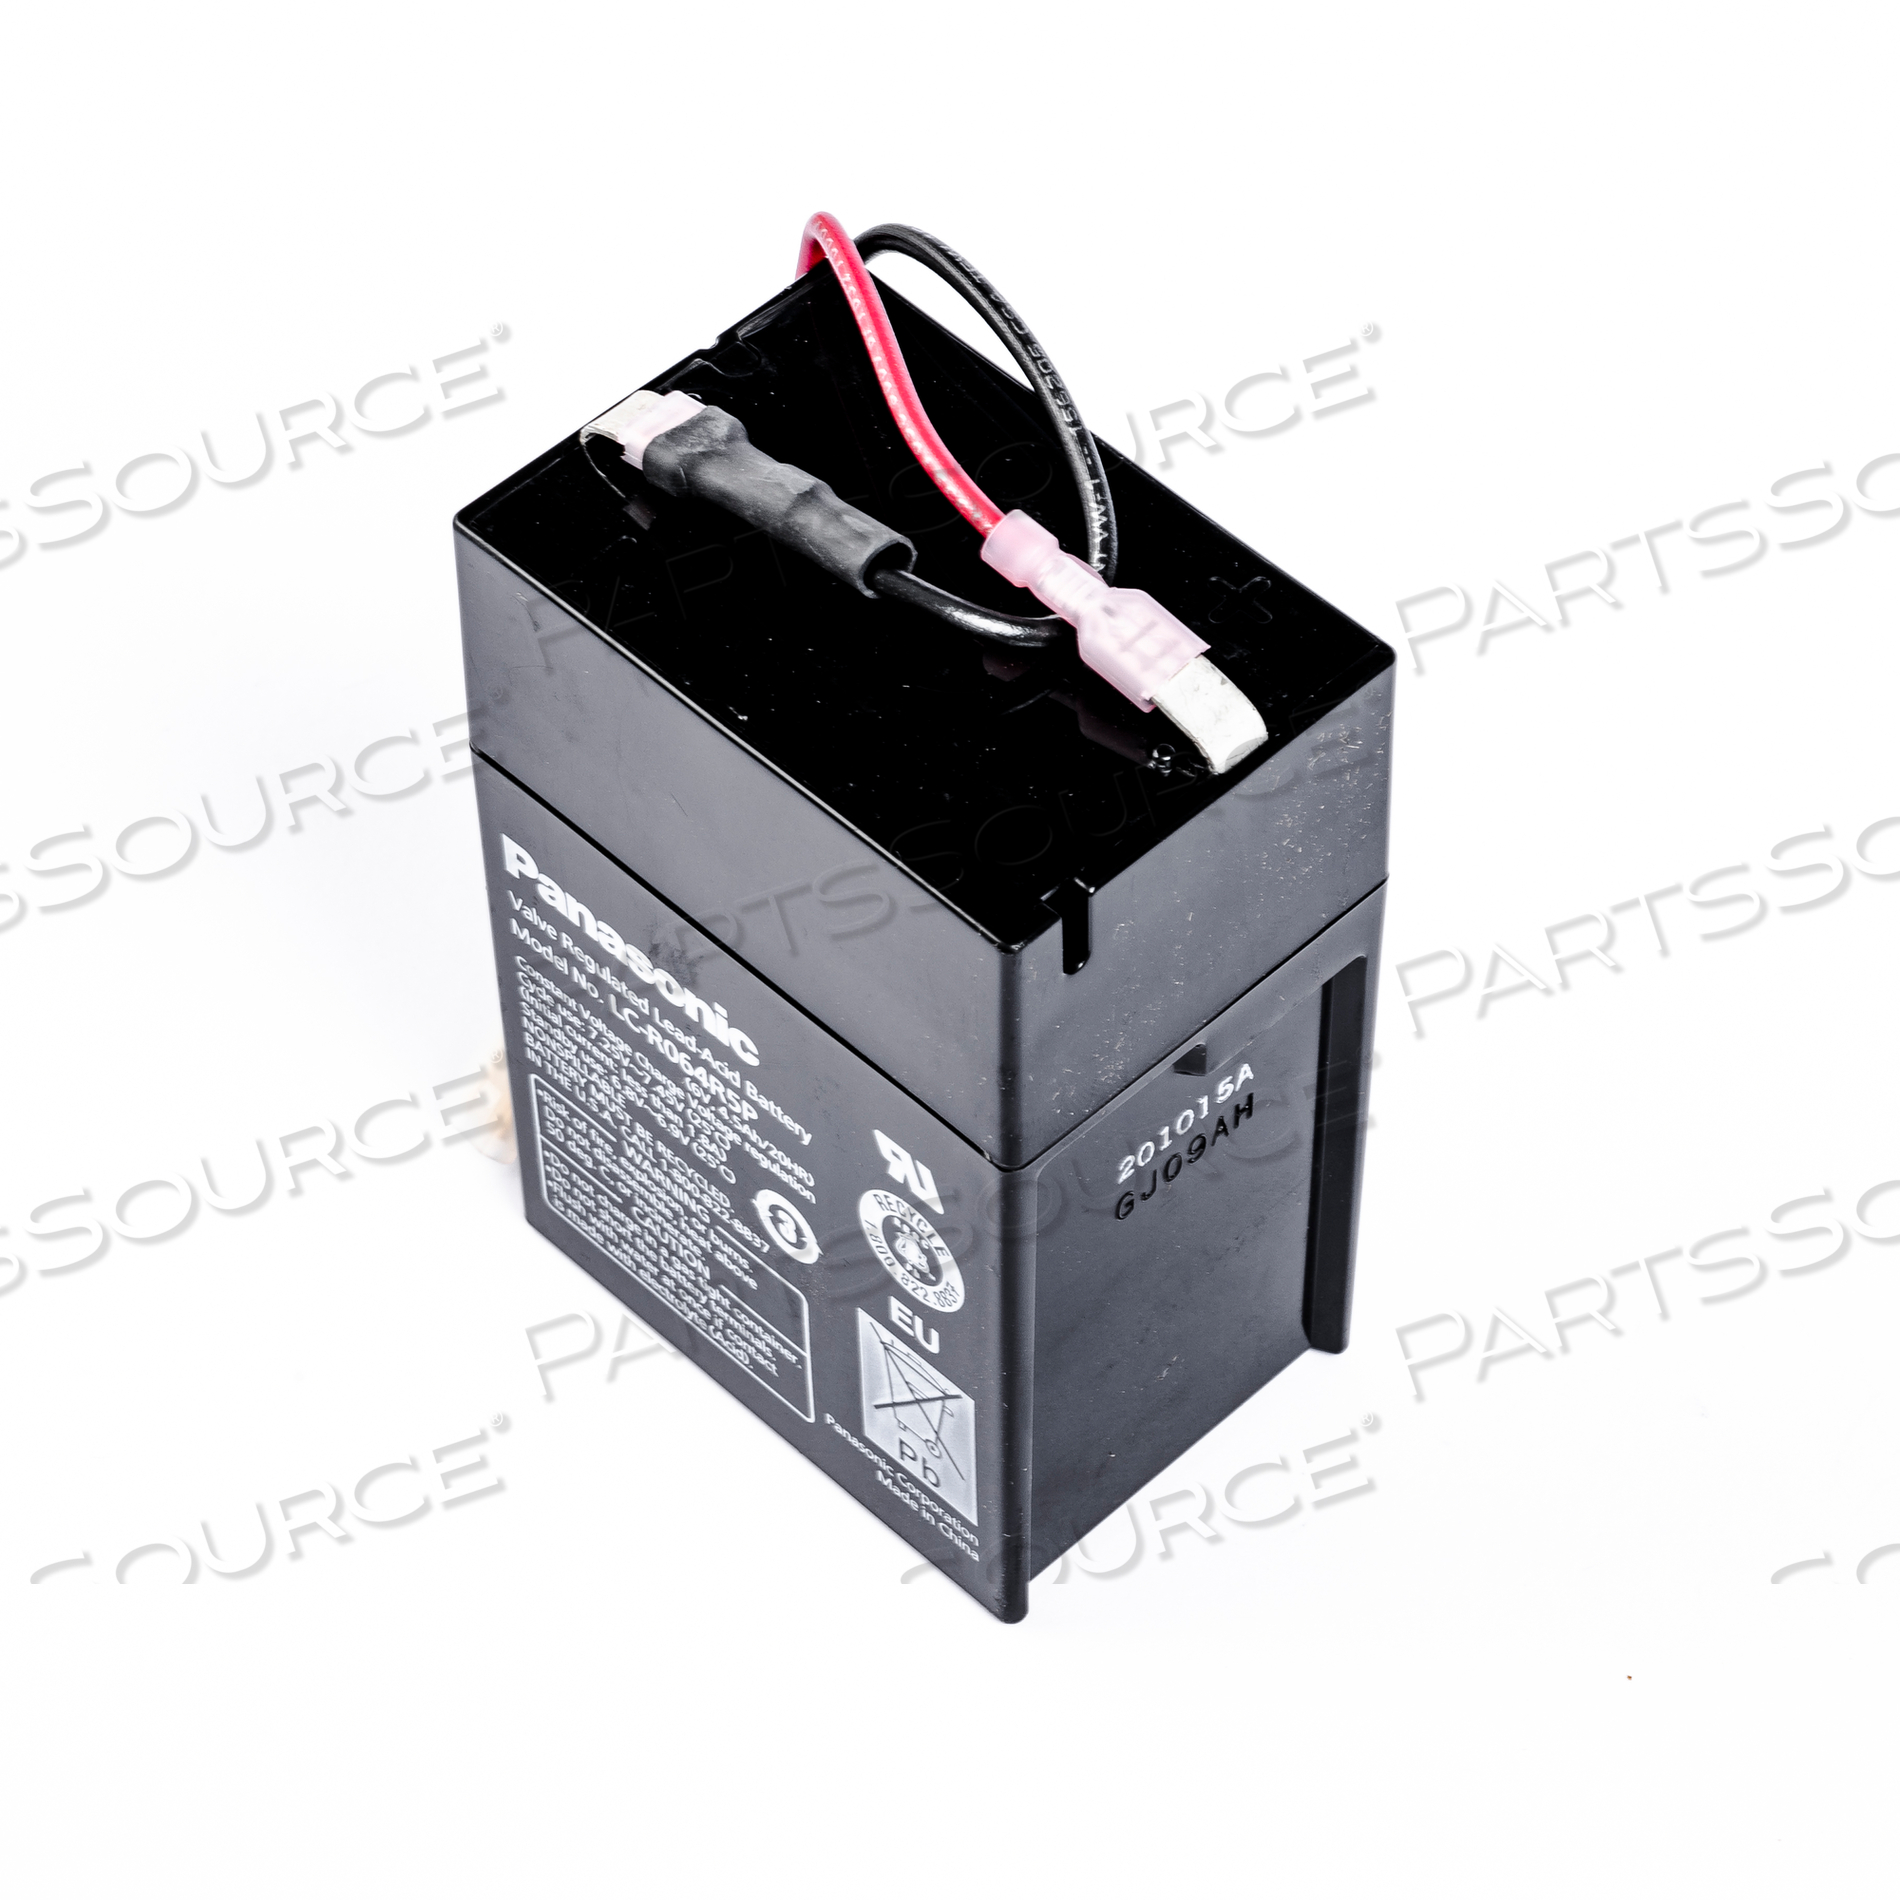 1504-3505-000 Datex-Ohmeda BATTERY, SEALED LEAD ACID, 6V, 4.5 AH :  PartsSource : PartsSource - Healthcare Products and Solutions